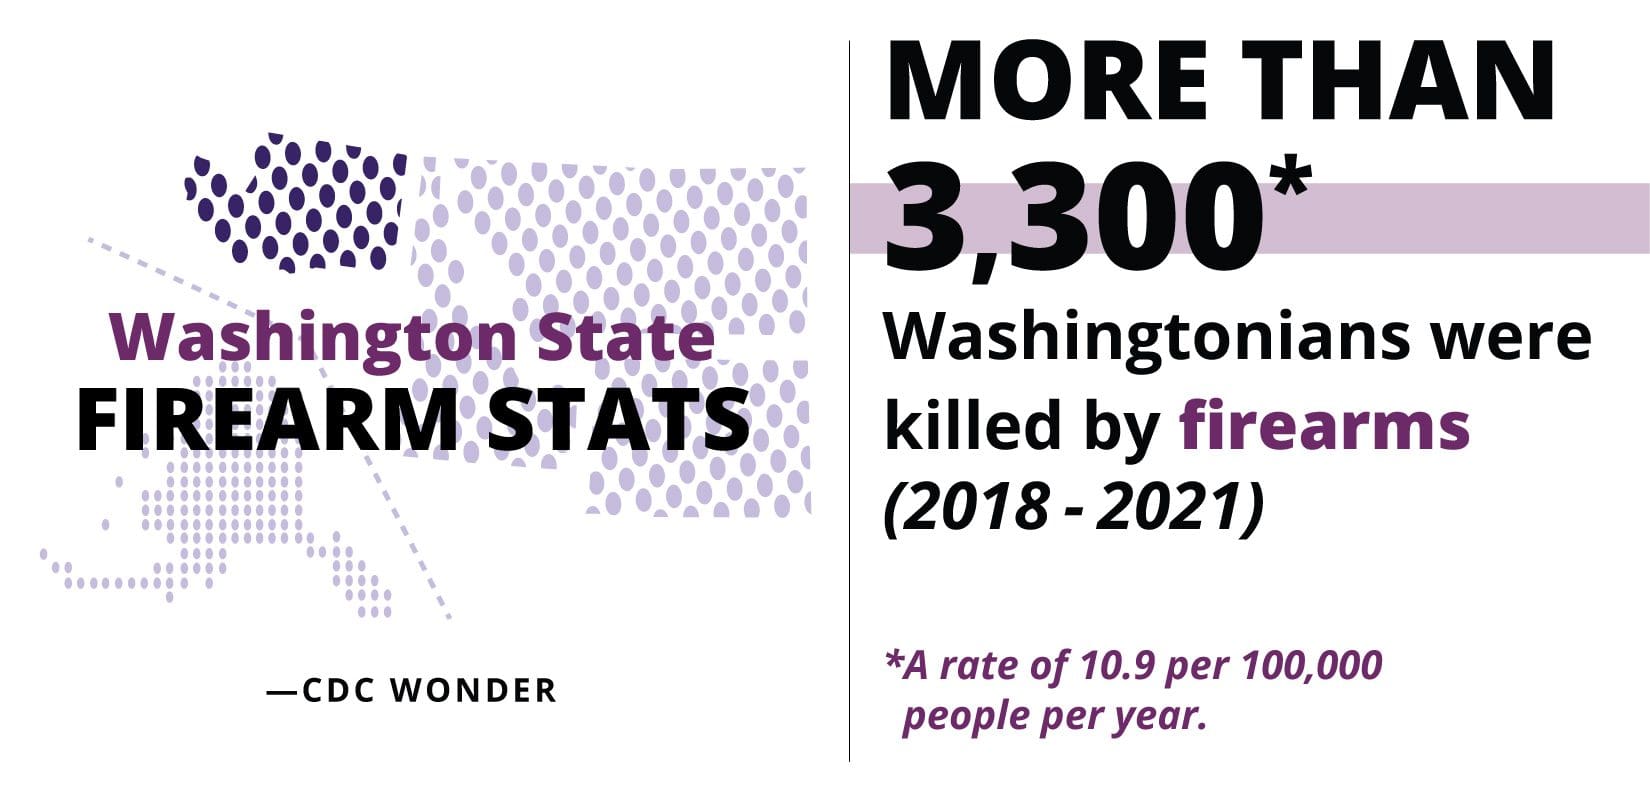 WA State Firearm Stats - MORE THAN 3,300* Washingtonians were killed by ﬁrearms (2018 - 2021) *A rate of 10.9 per 100,000 people per year.